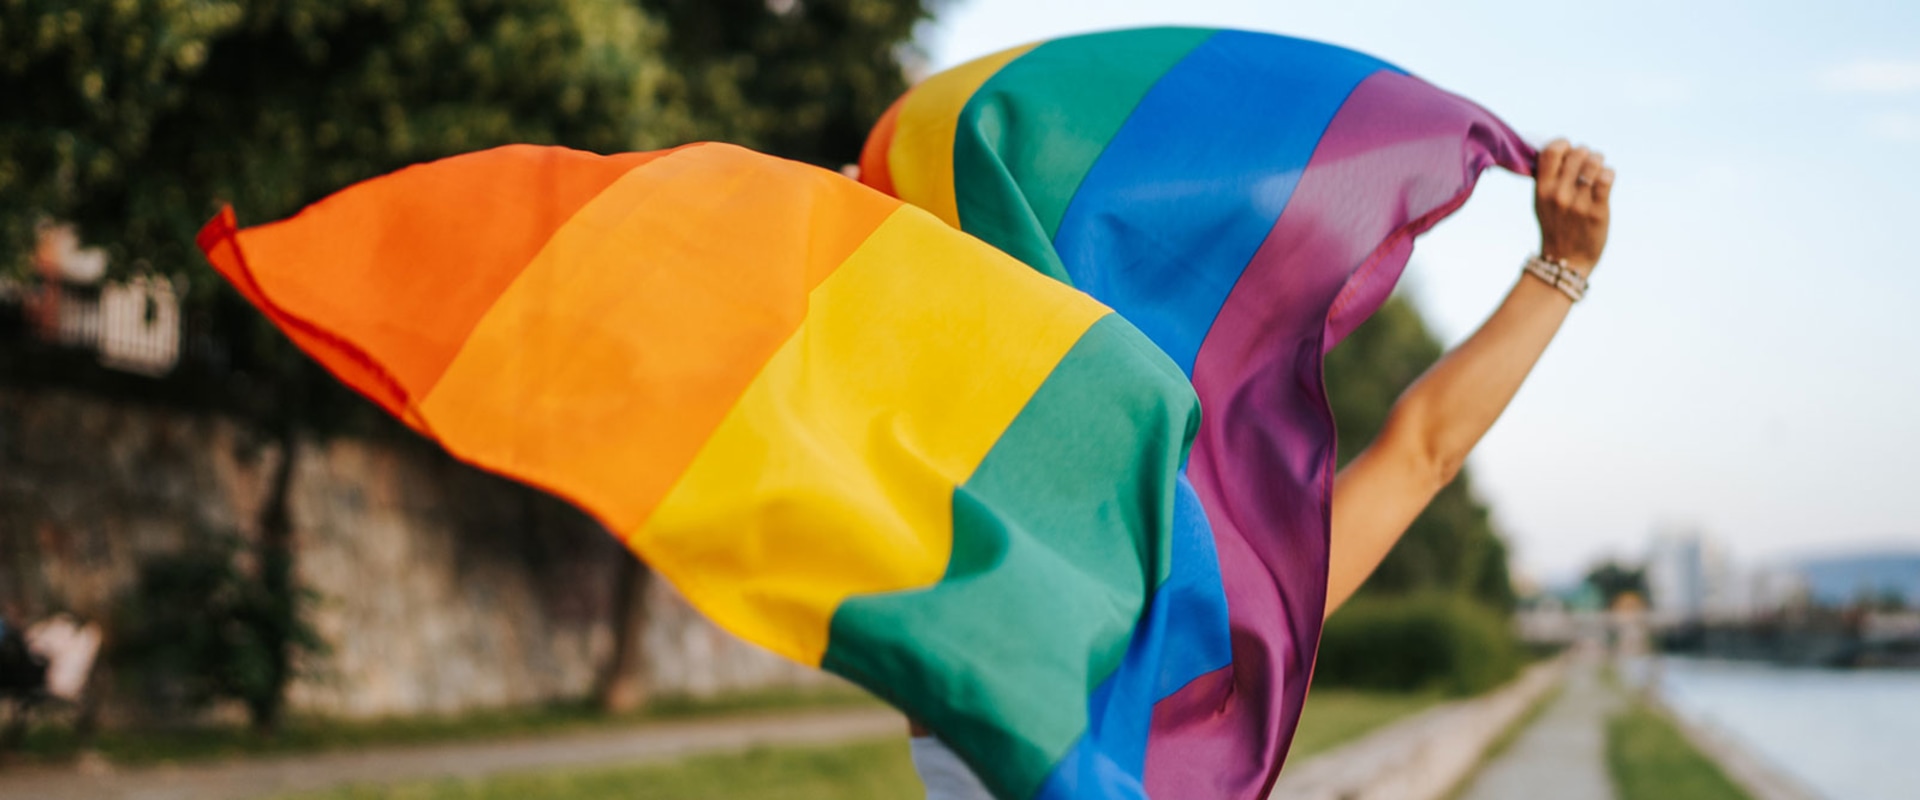 LGBTQ Rights in Central Missouri: How the Local Media Can Make a Difference